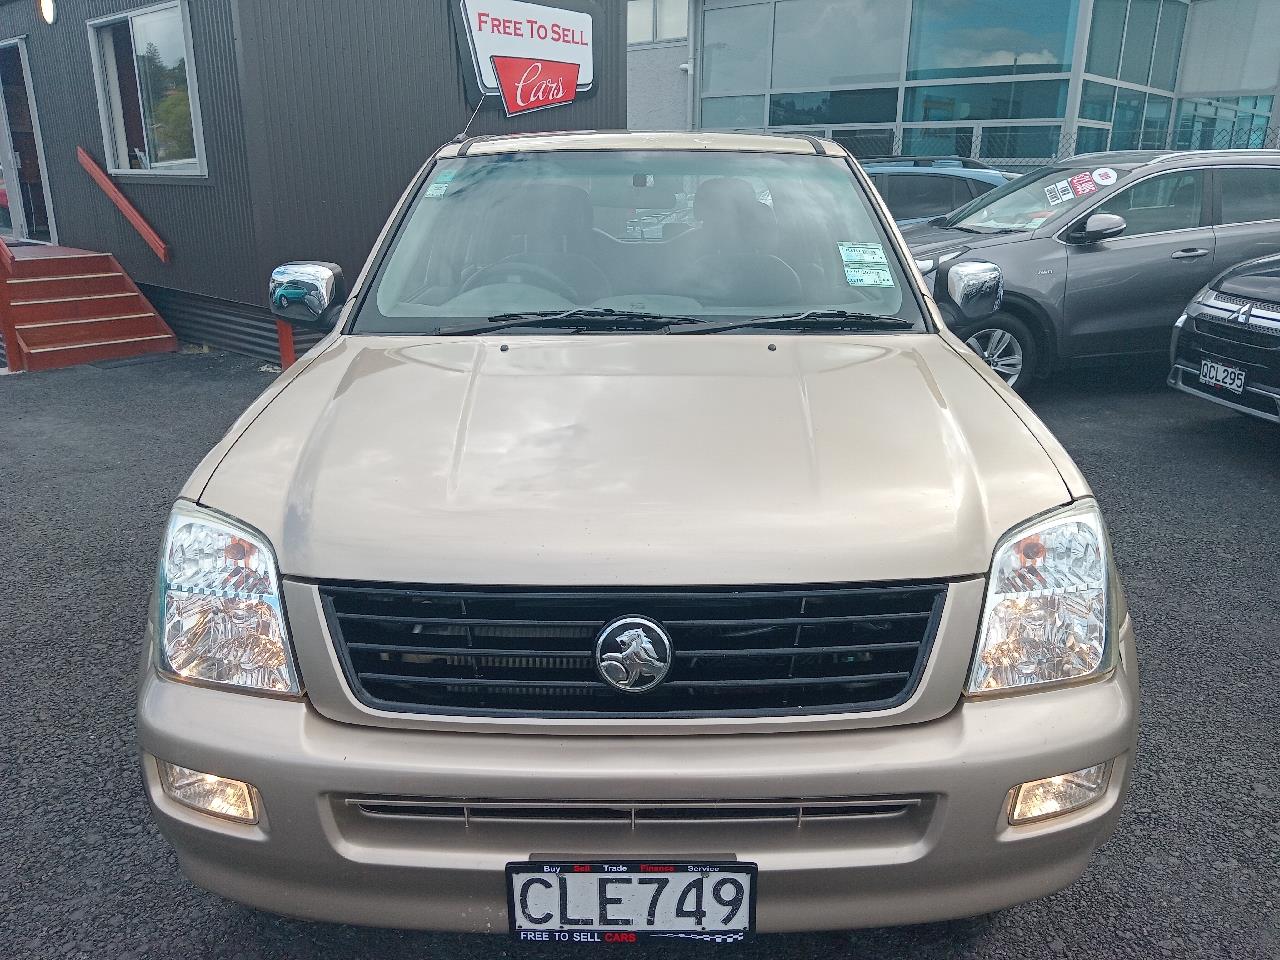 2005 Holden RODEO